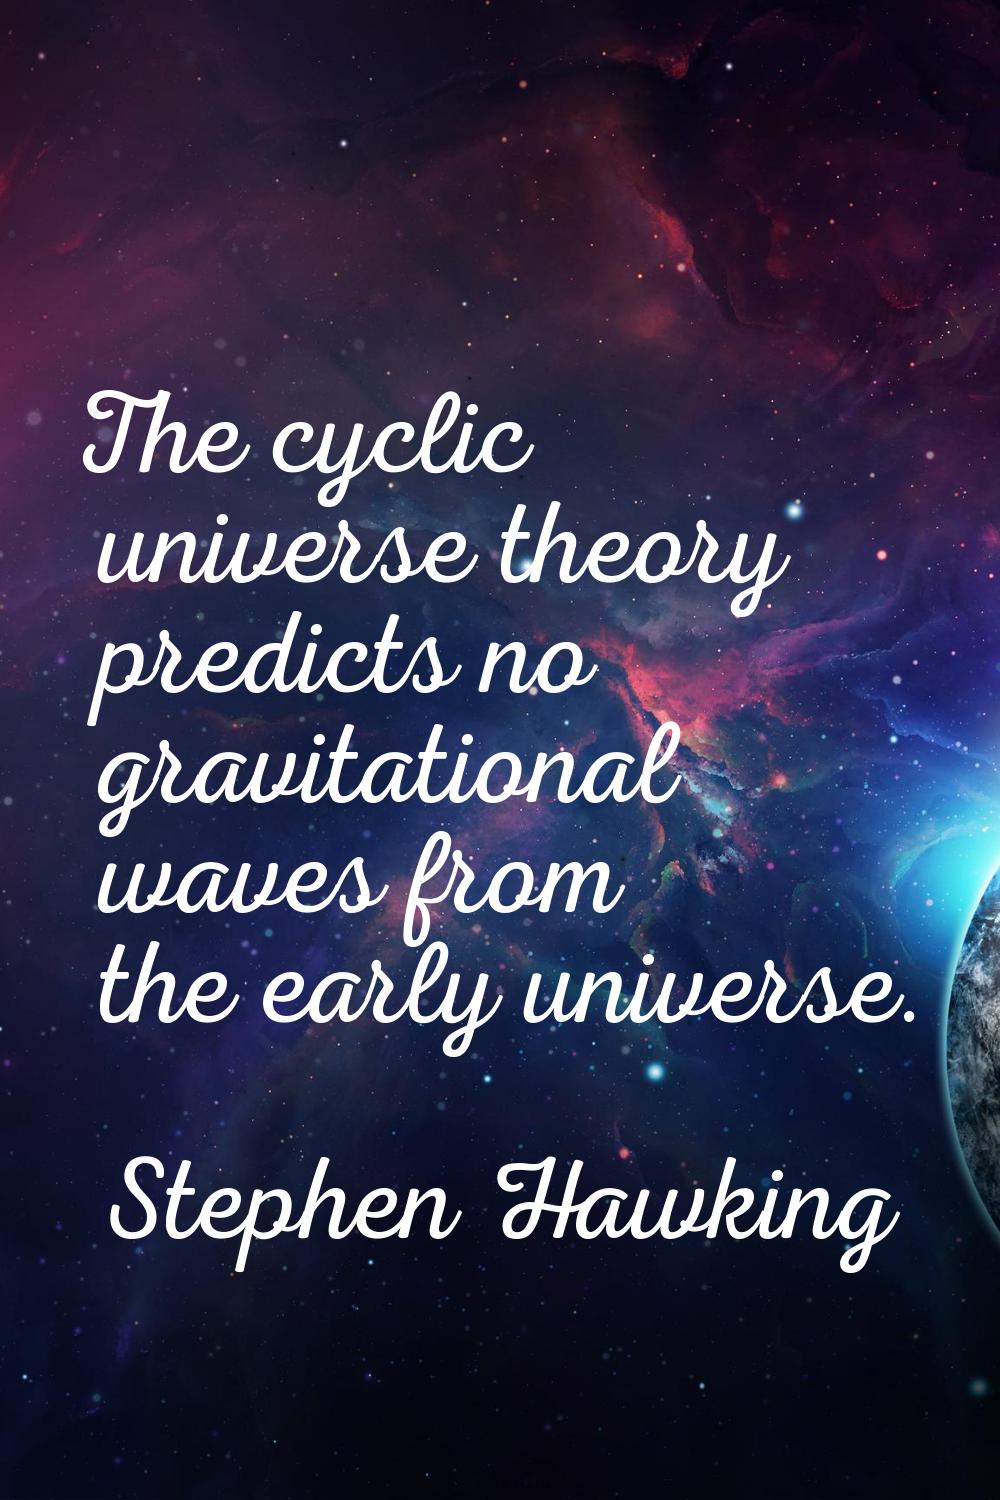 The cyclic universe theory predicts no gravitational waves from the early universe.